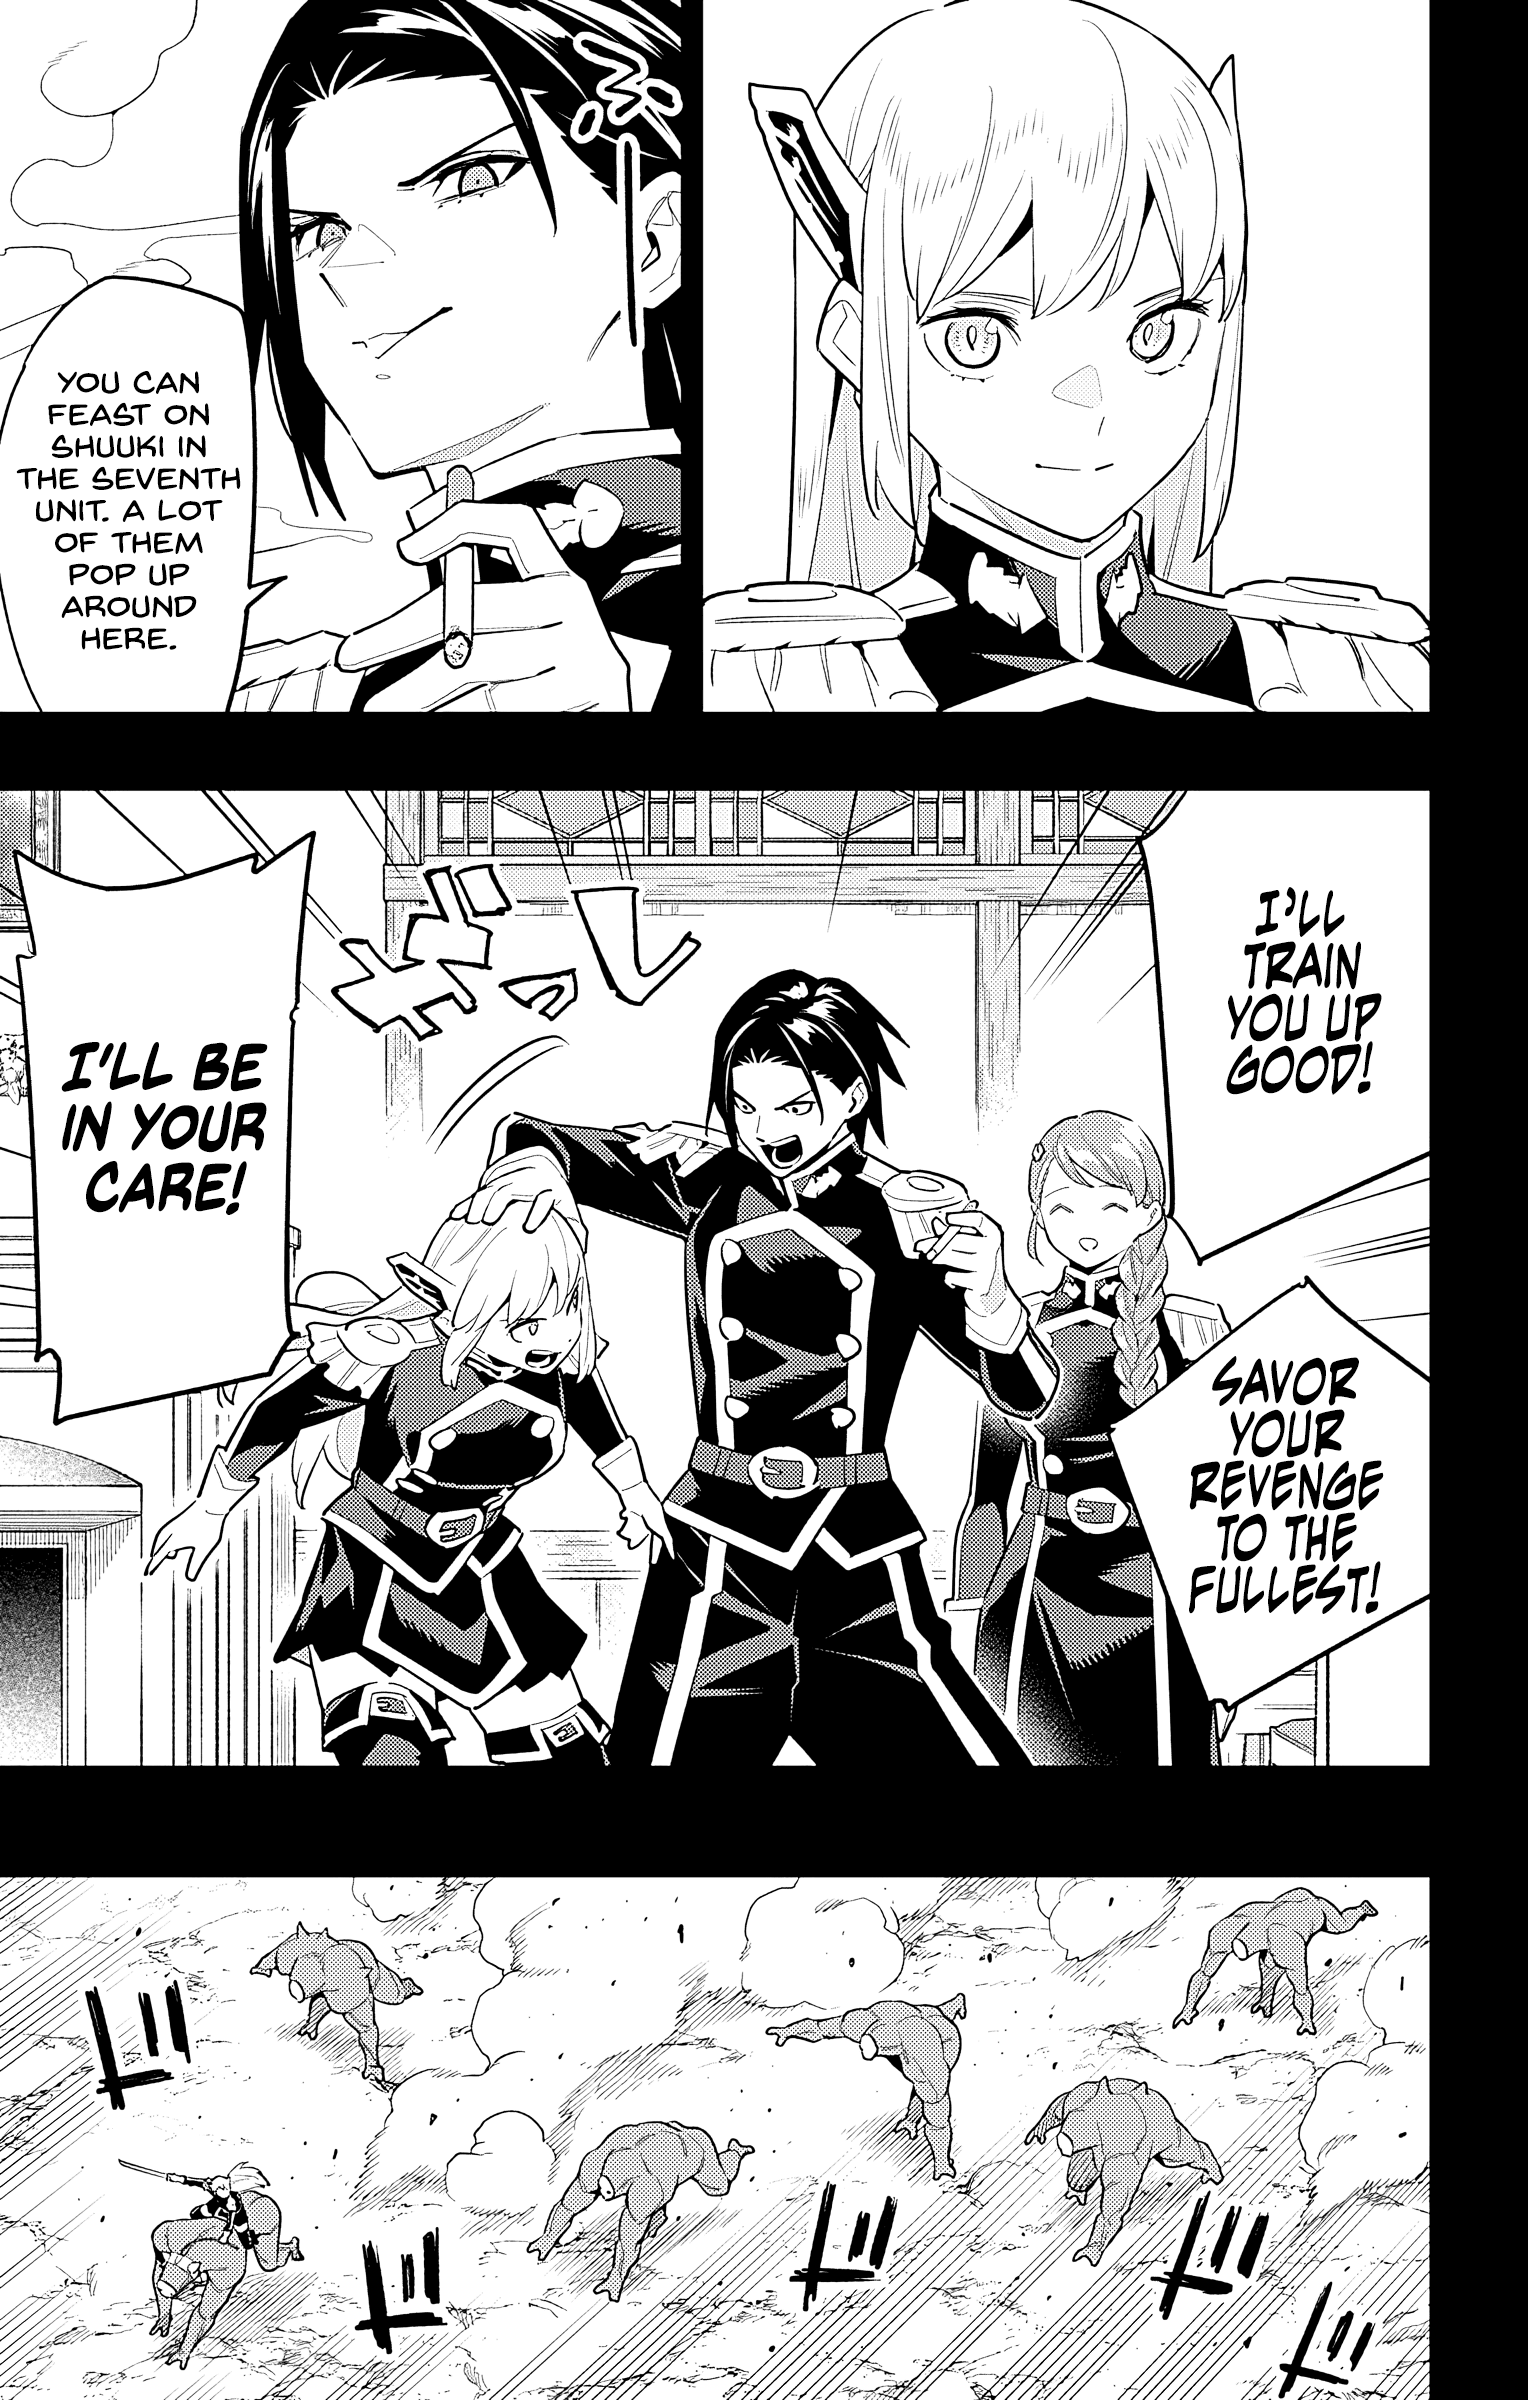 Slave Of The Magic Capital's Elite Troops - Page 3